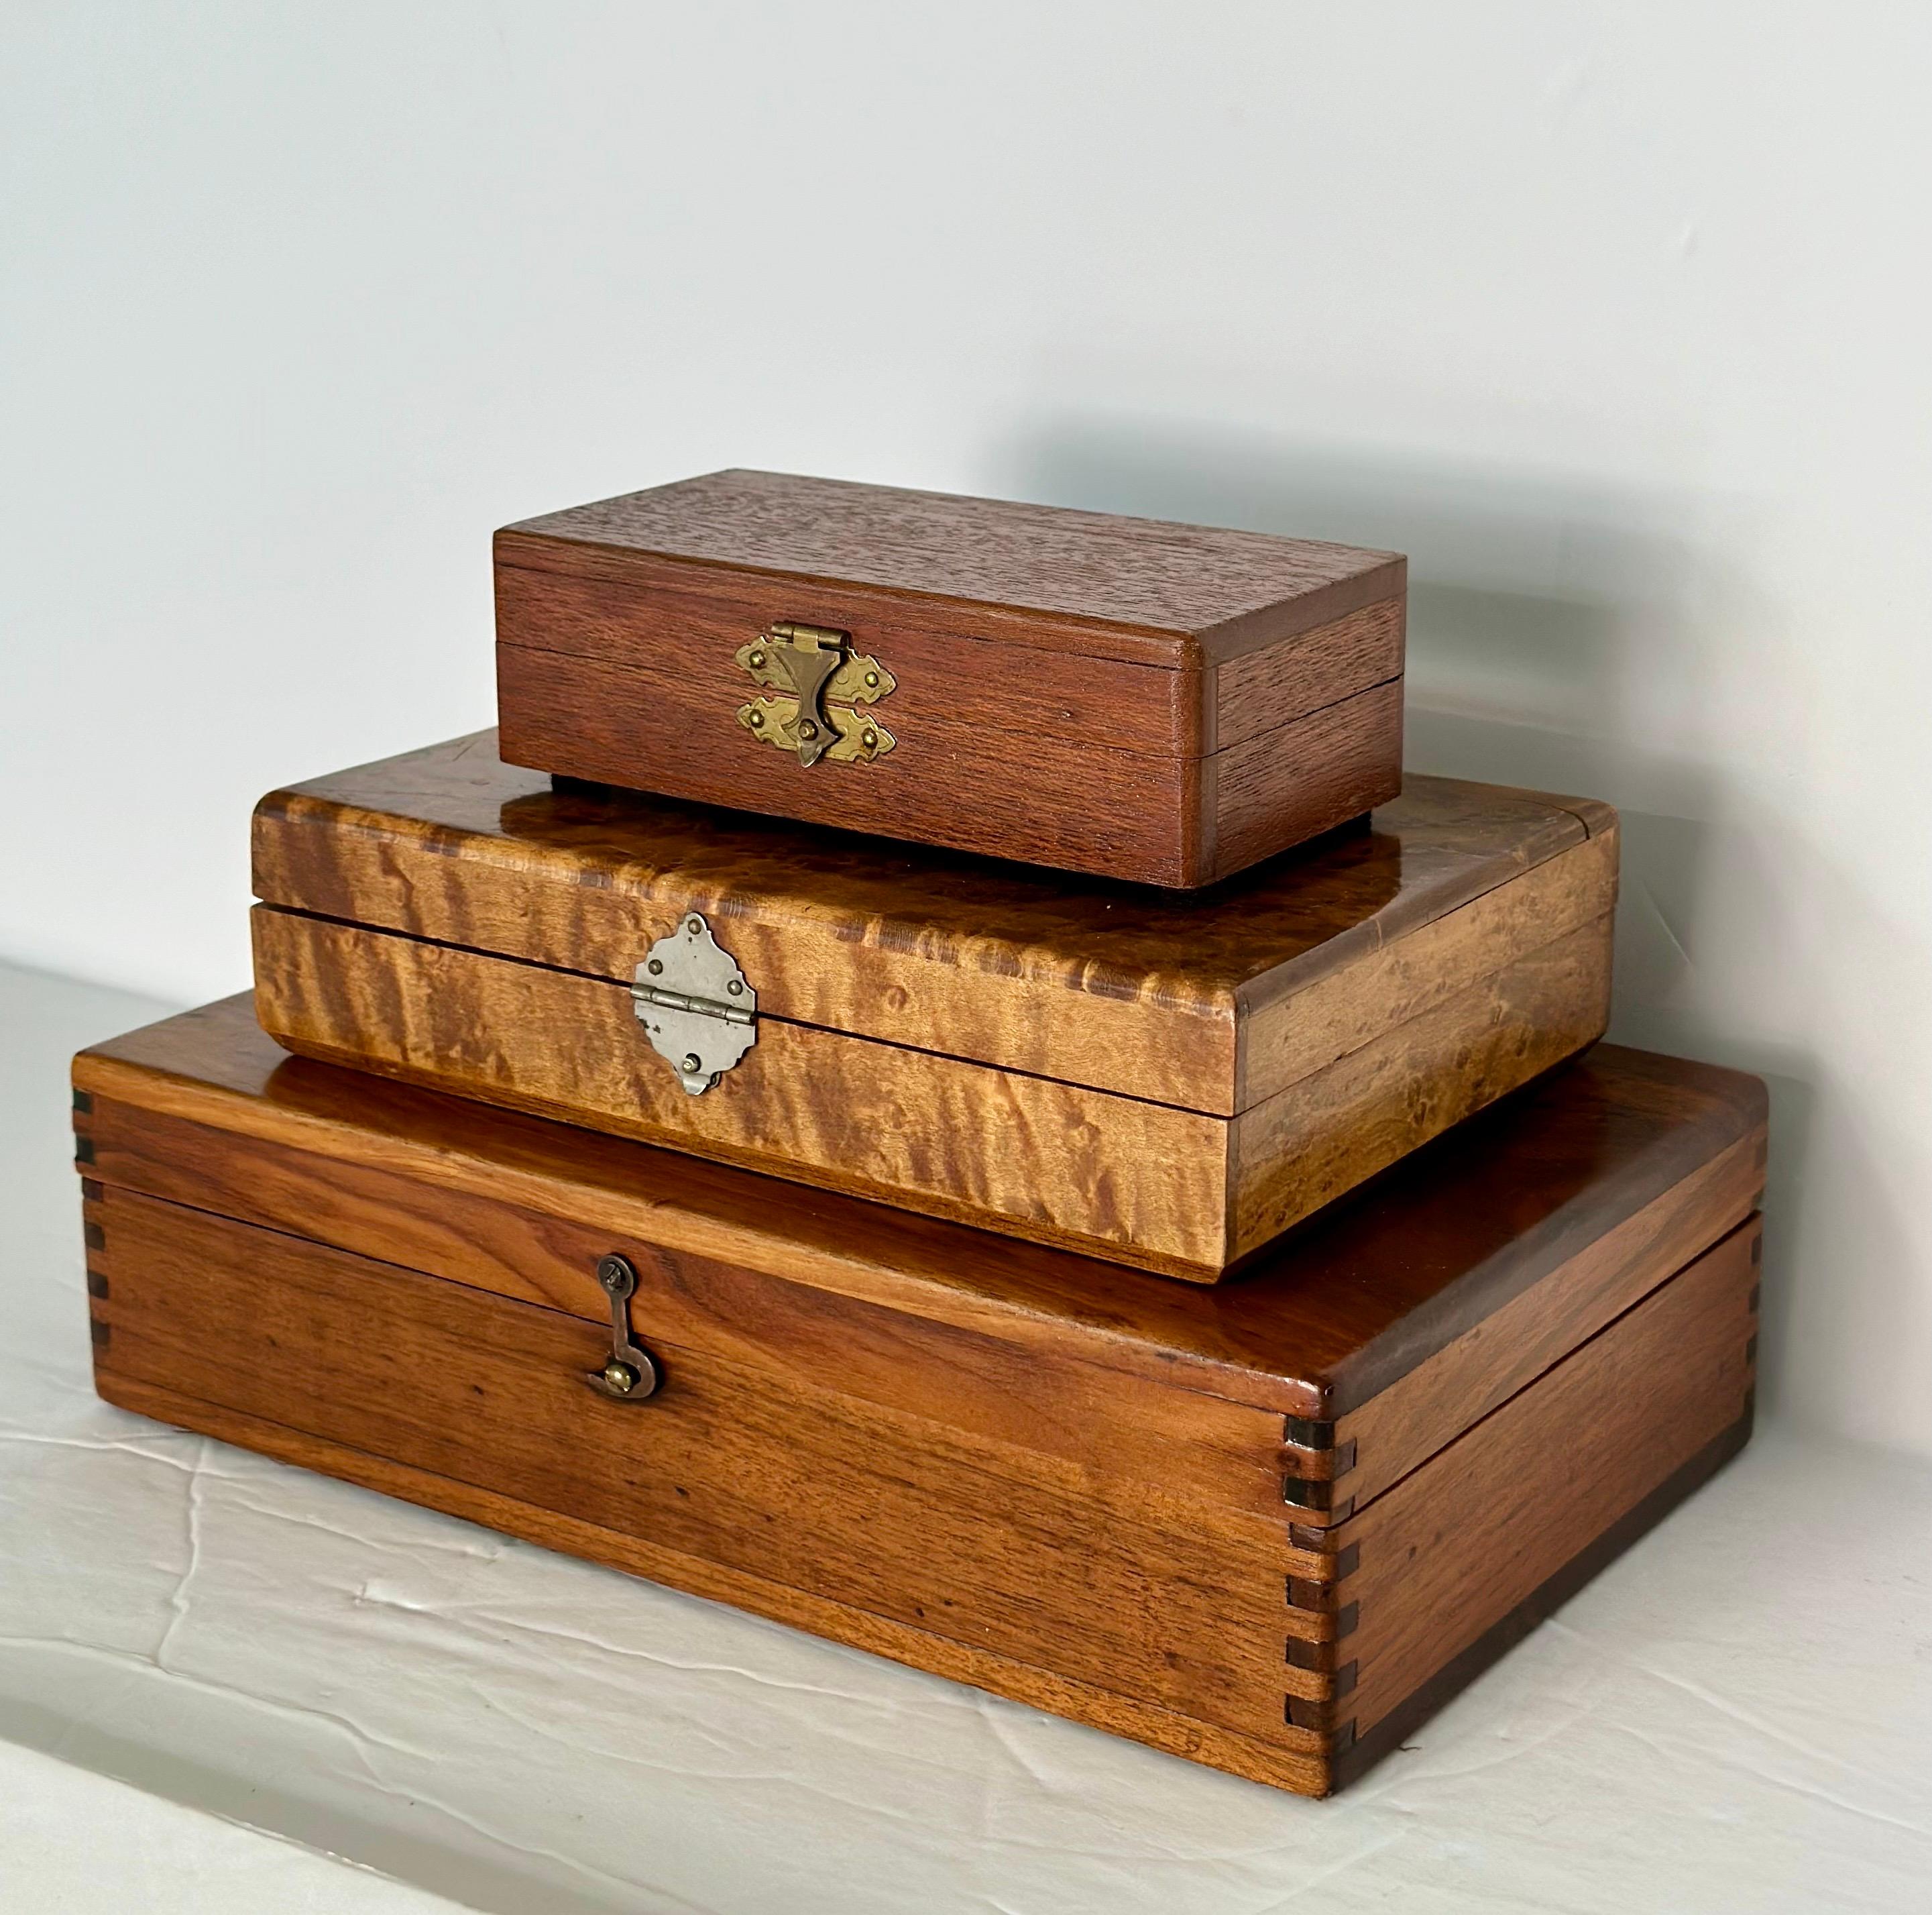 We are very pleased to present a charming set of three antique boxes, each meticulously crafted from different wood species.  This selection of woods provides a stunning contrast in color, texture, and grain variation, enhancing the visual appeal